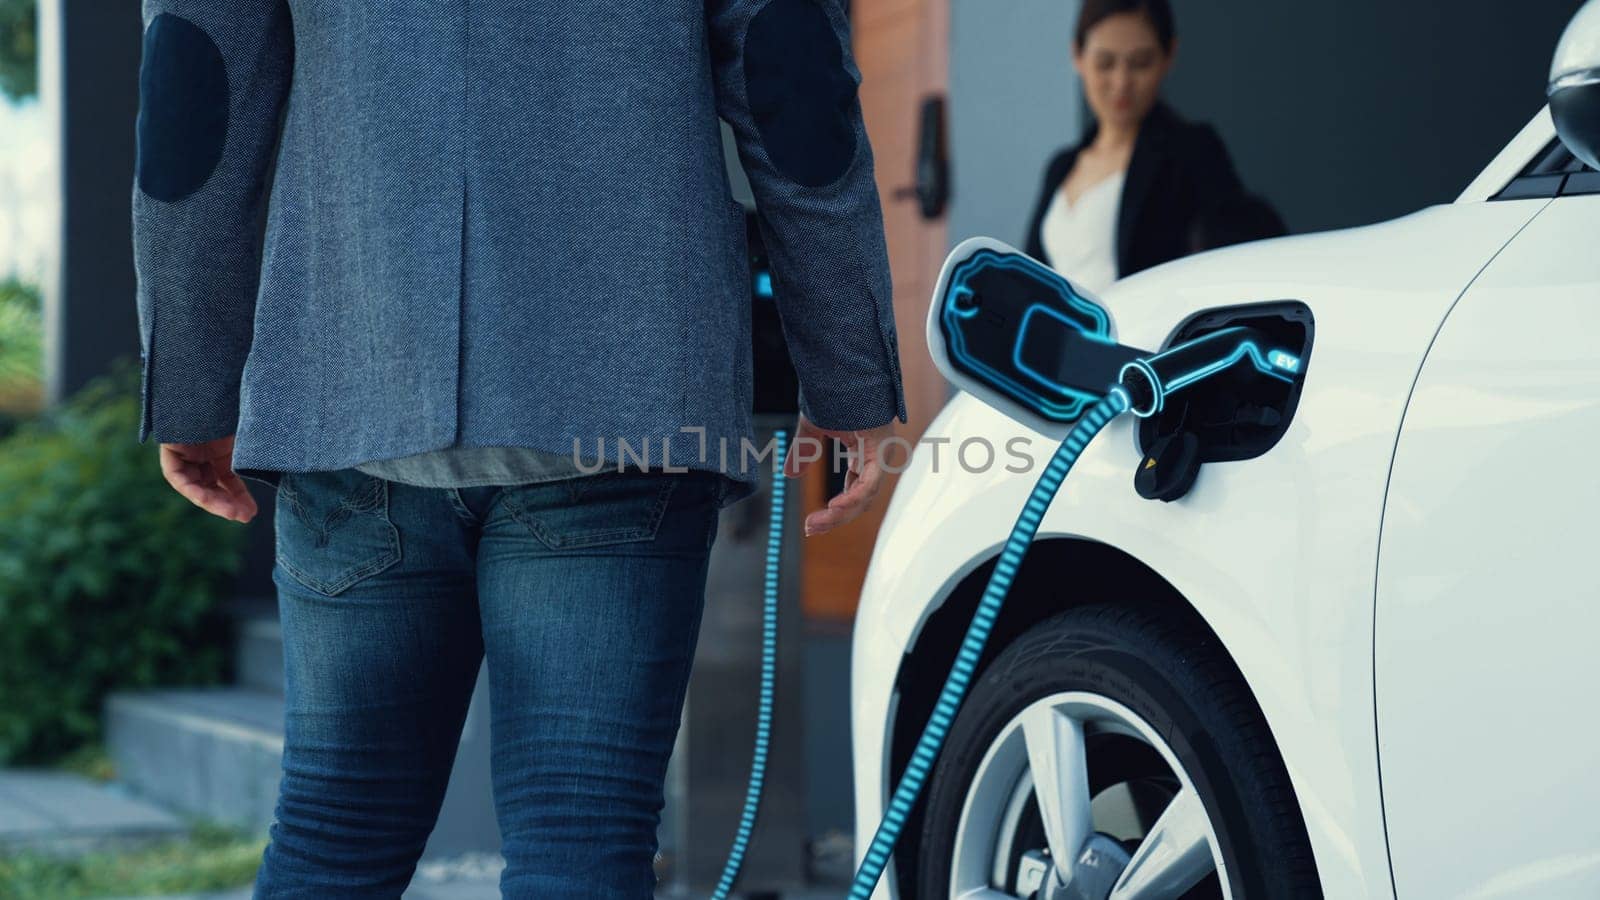 Modern family couple recharge electric car from home charging station. Peruse by biancoblue